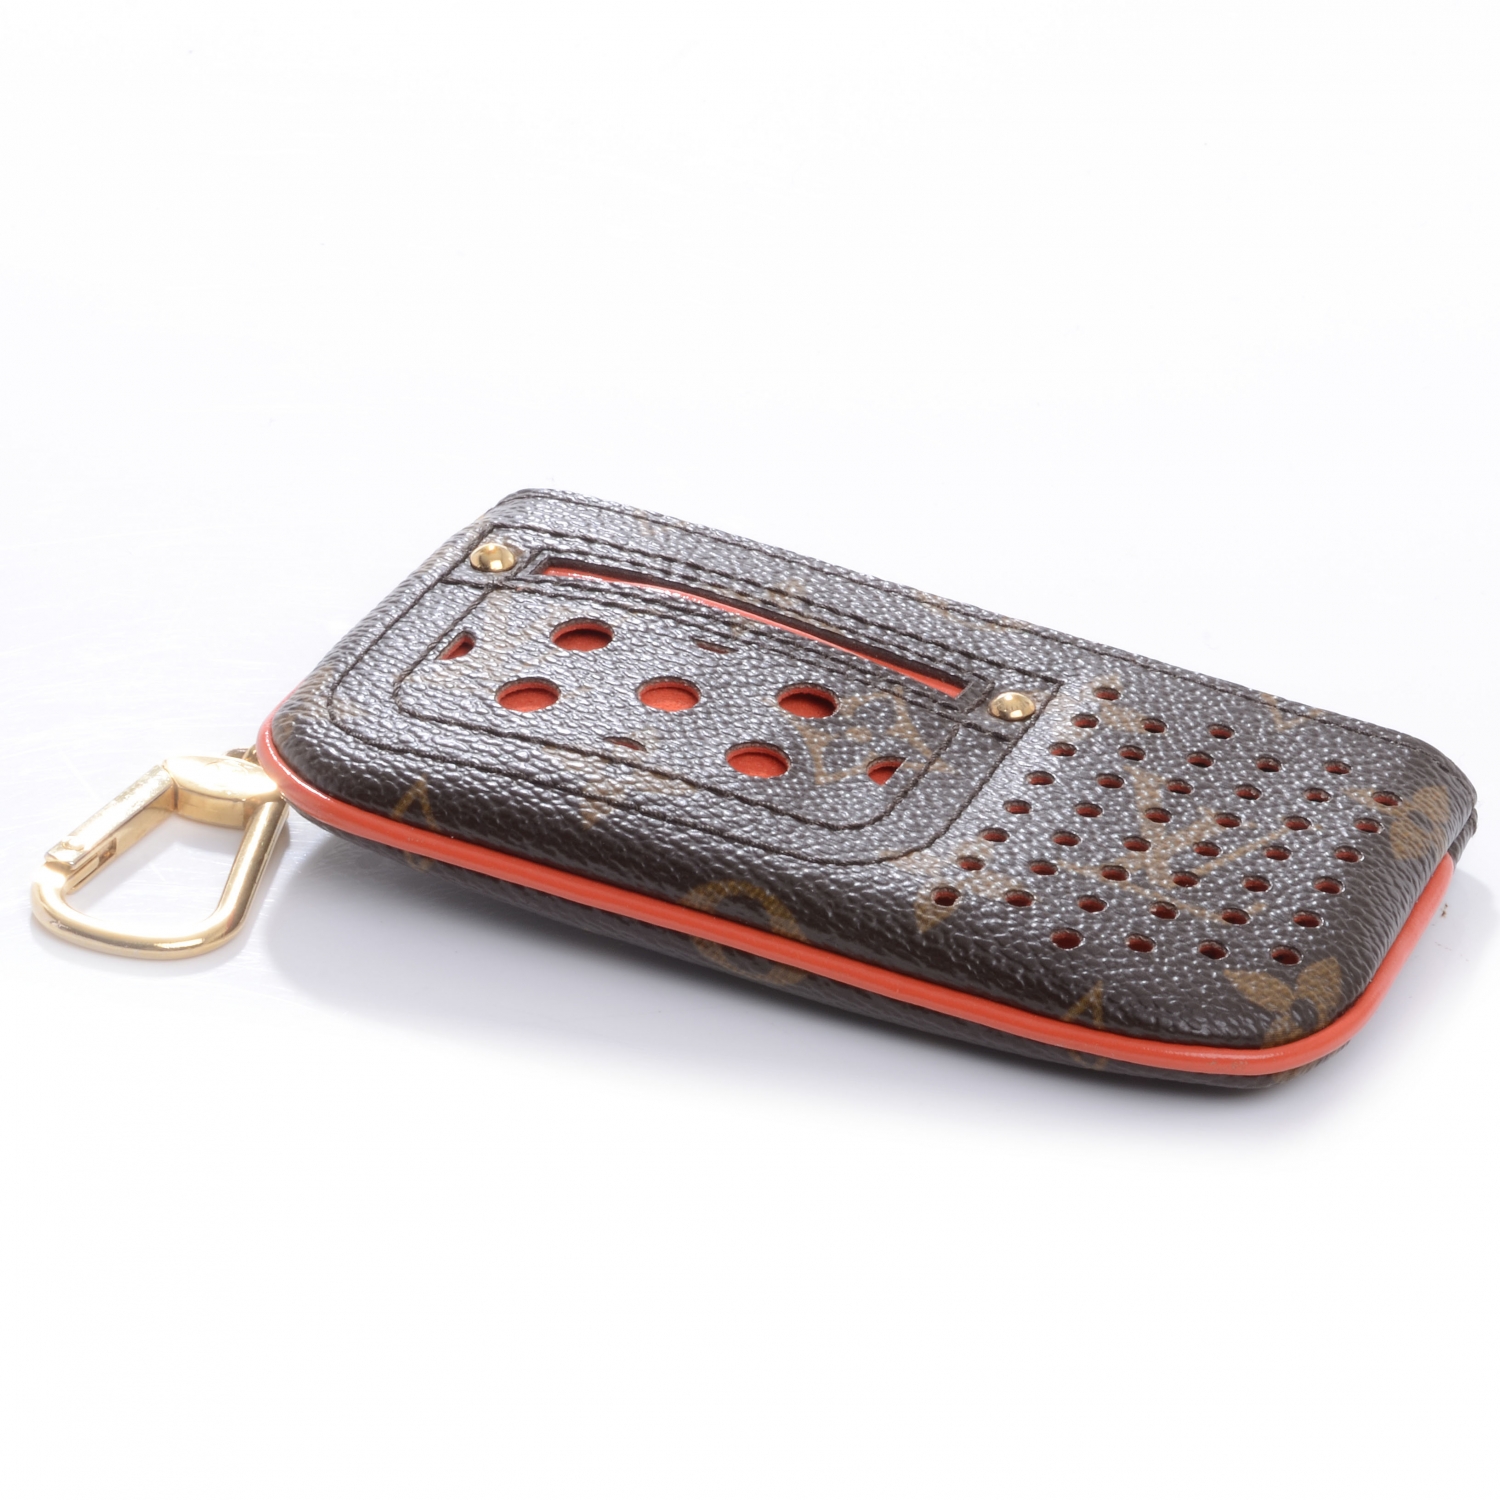 LOUIS VUITTON Perforated Key Ring Cles Pochette Orange 46773